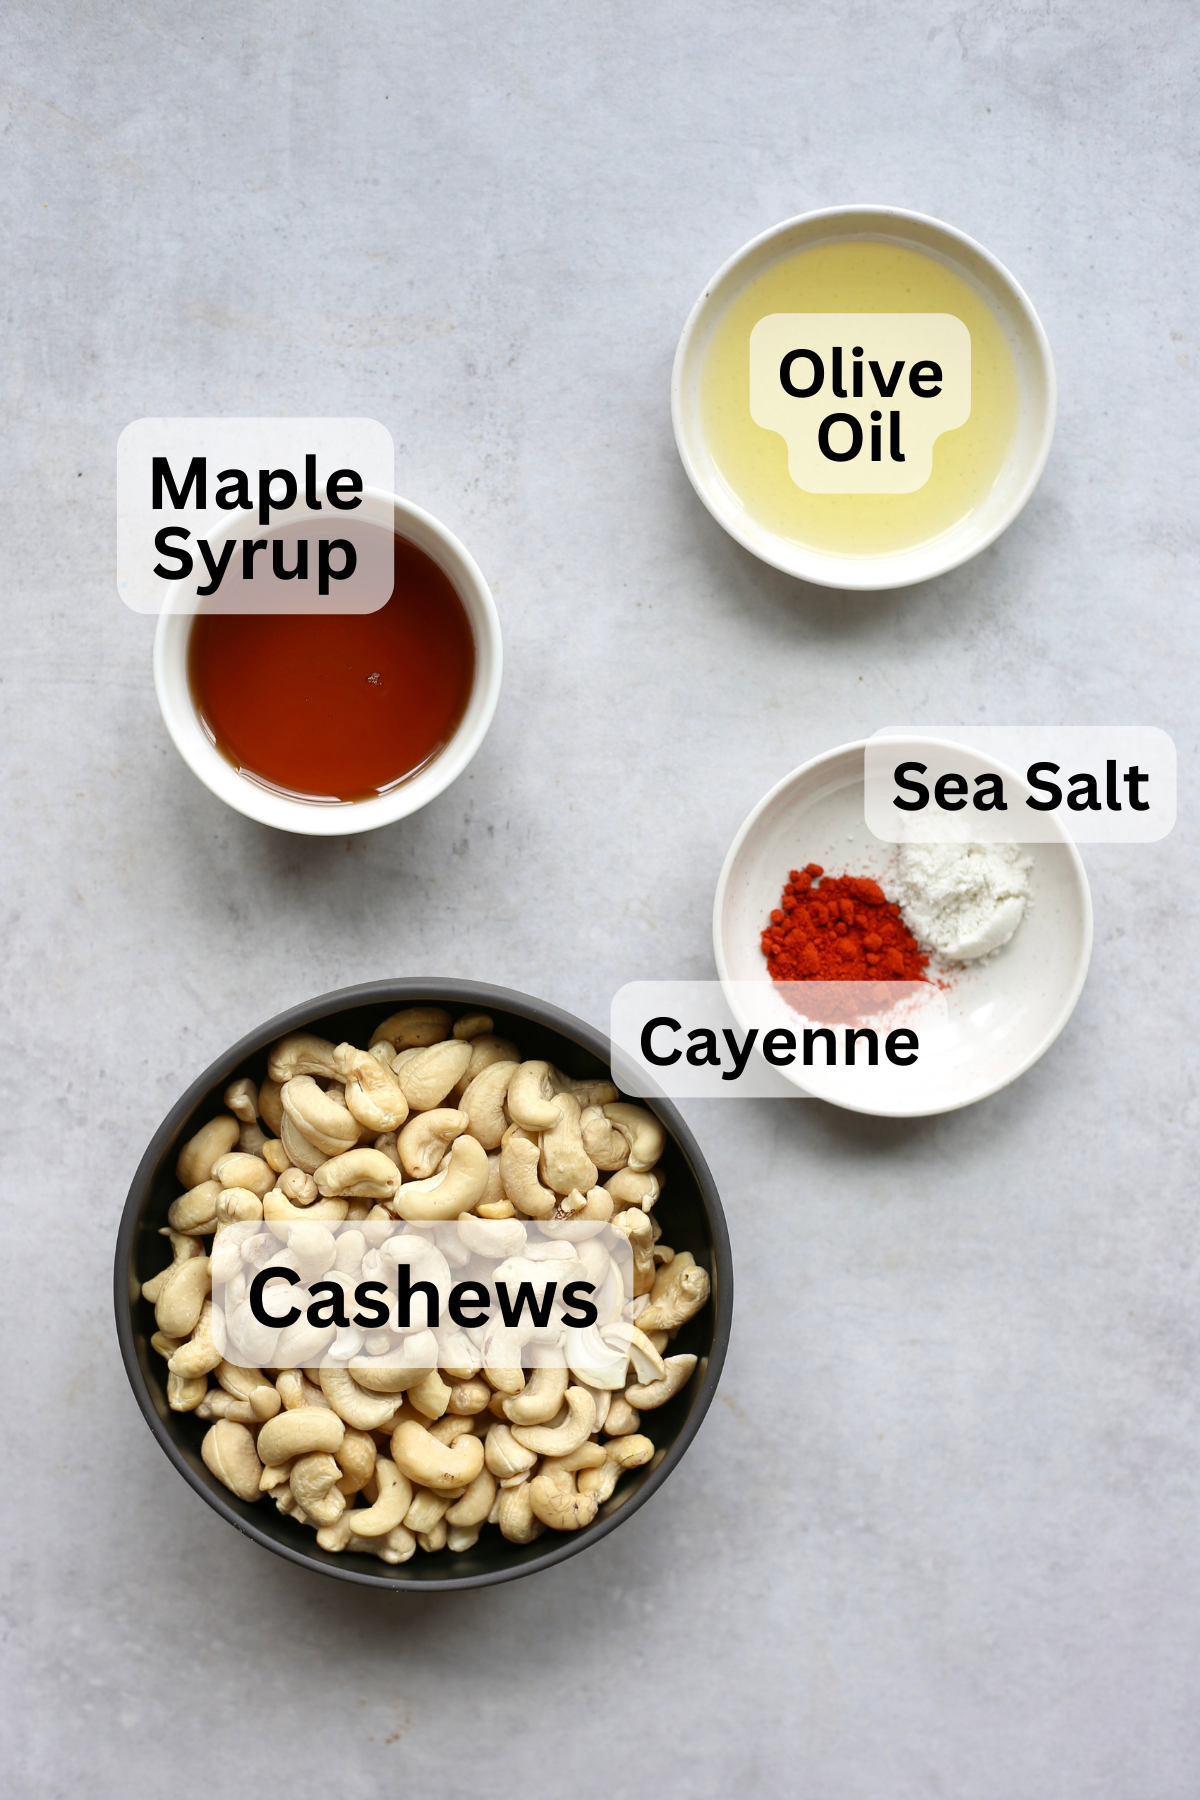 Cashews, maple syrup, olive oil, cayenne and sea salt measured out into bowls on a table.